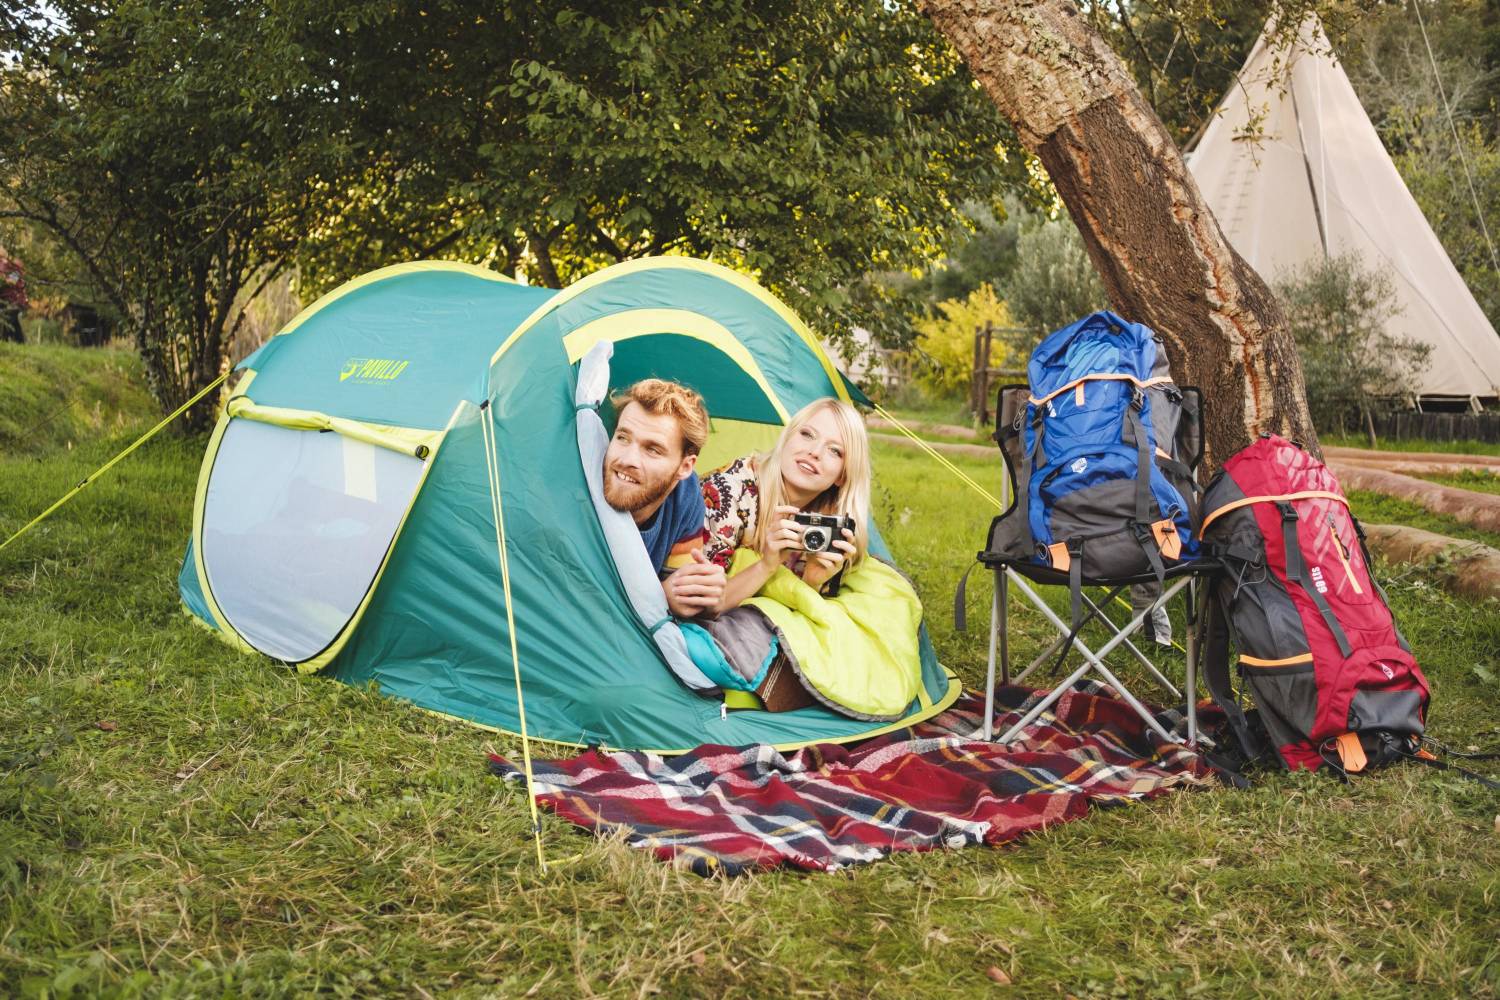 Two person tent